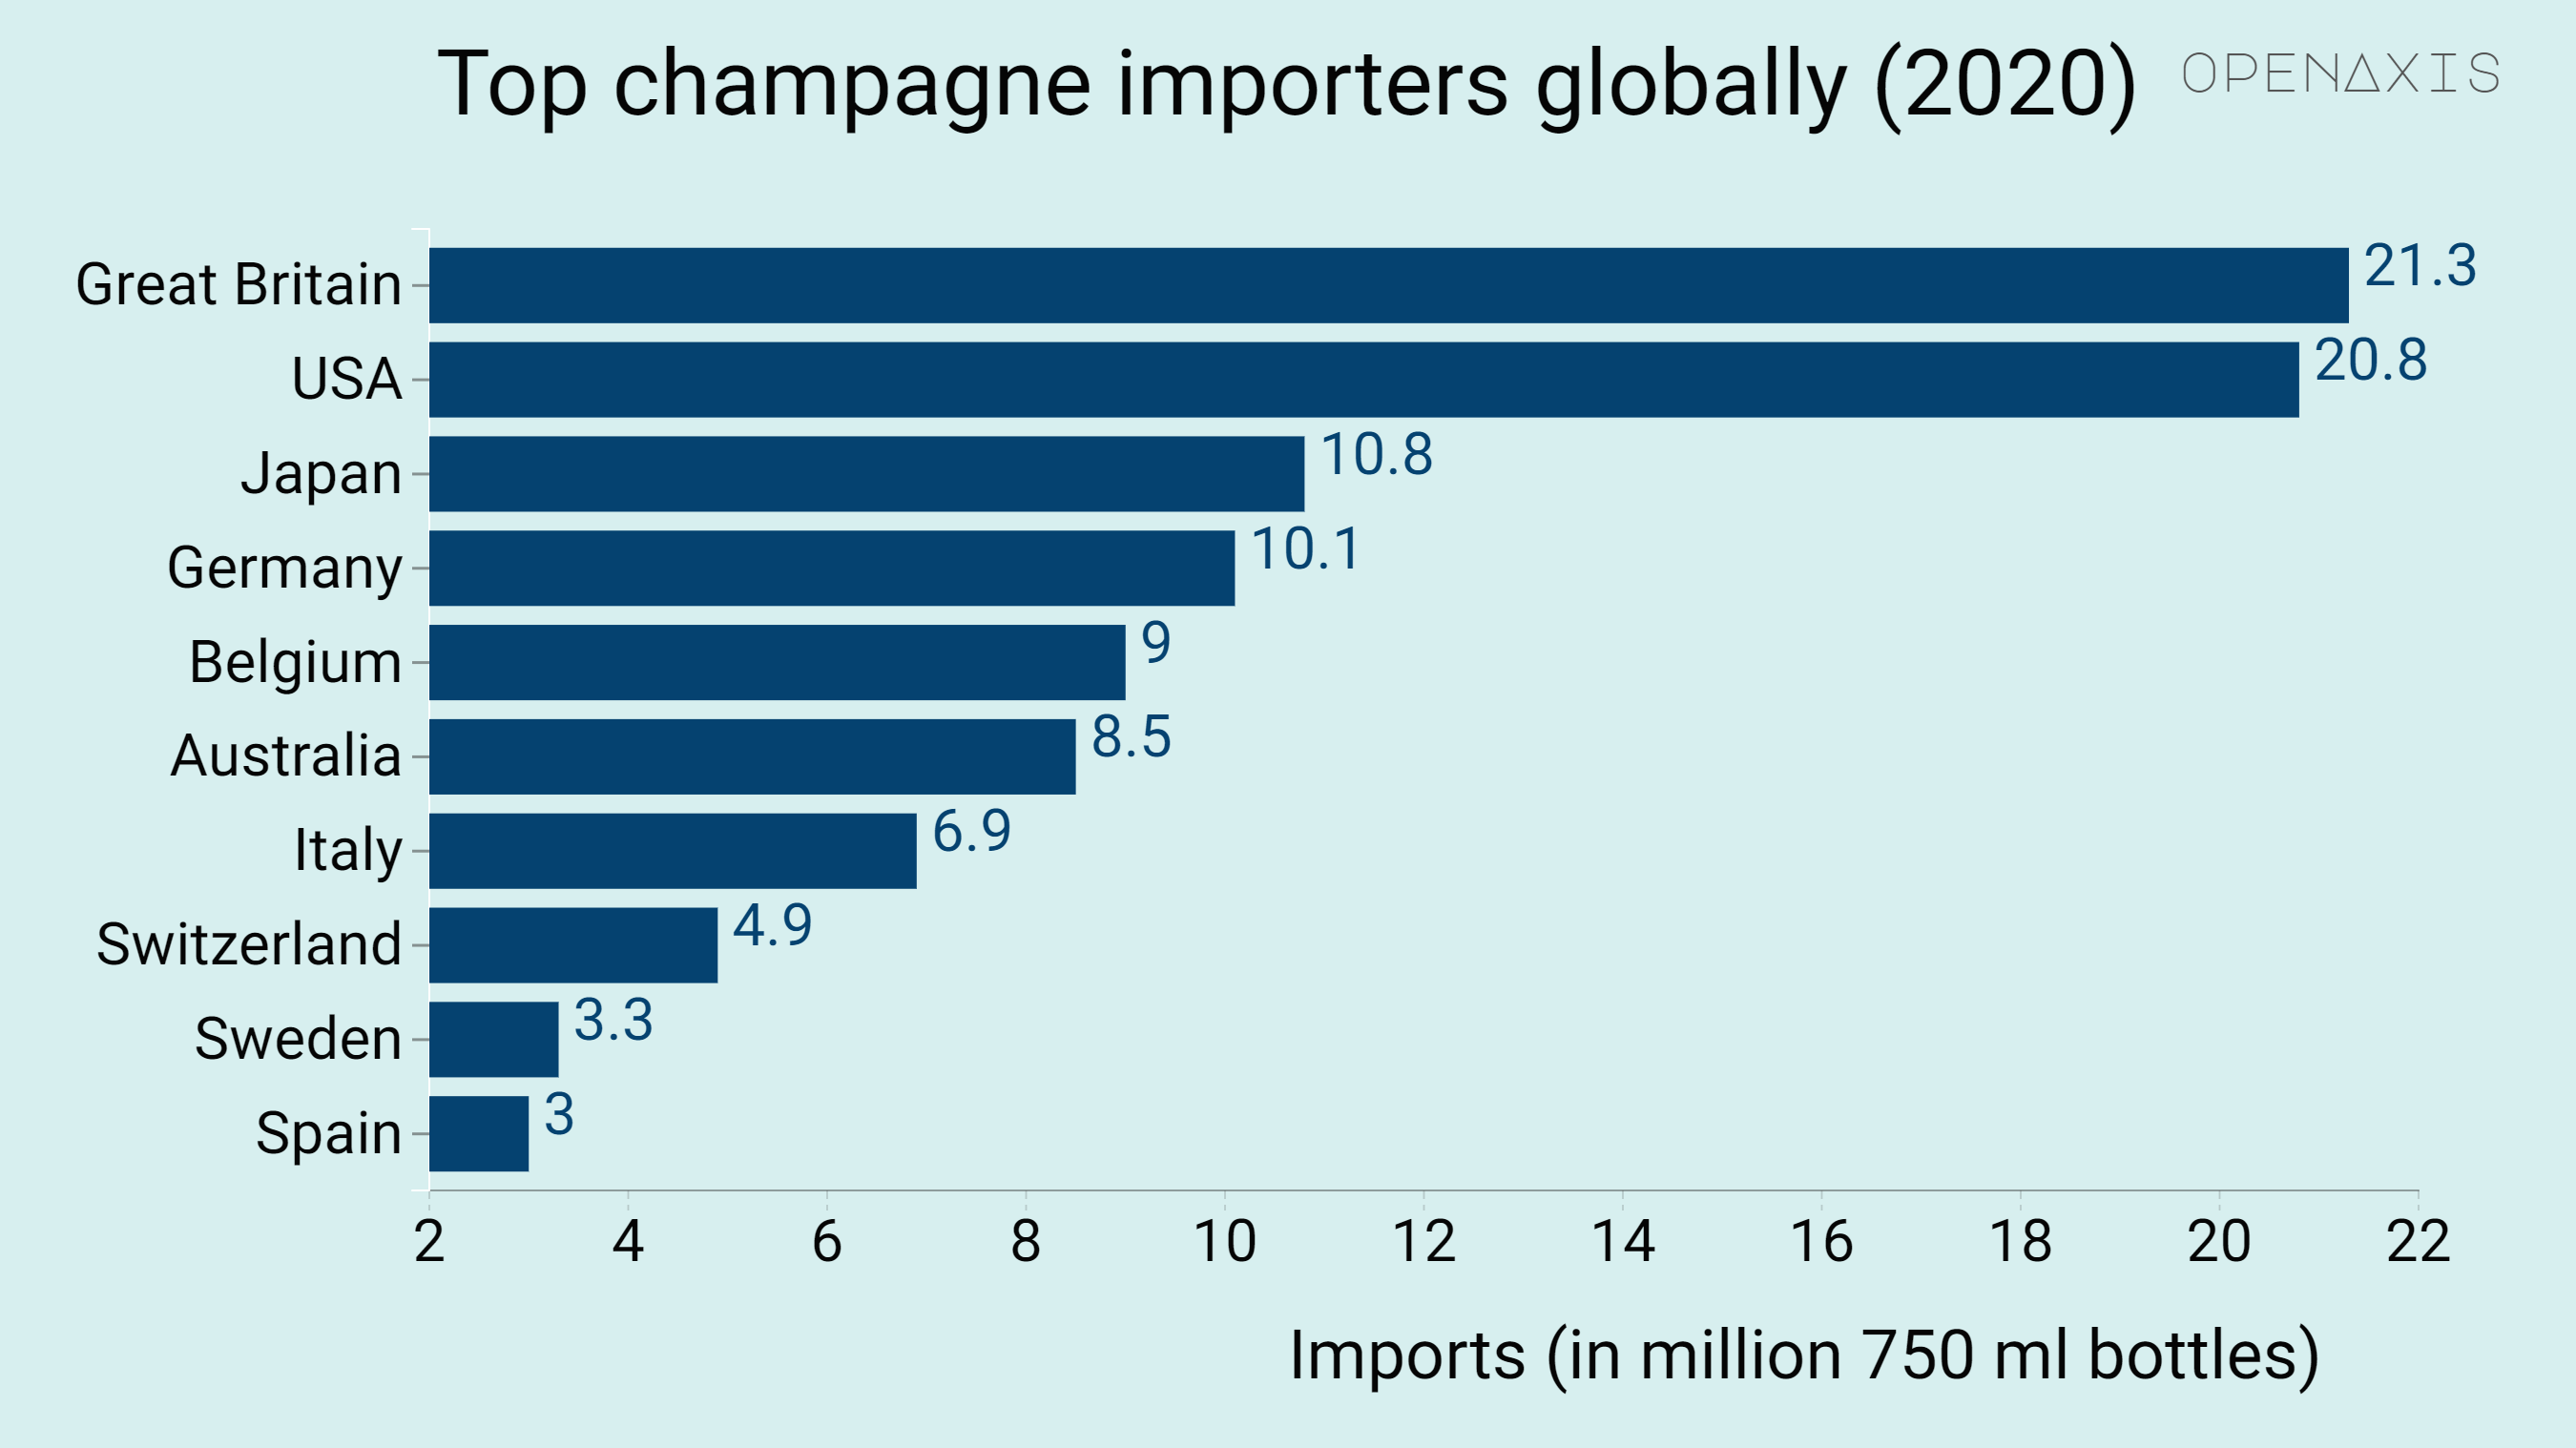 <p>The UK and the U.S. are leading the way when it comes to procuring real champagne with 21.3 and 20.8. million 750 milliliter bottles, also called bouteille, imported in 2020, respectively.</p><p><br /></p><p>As the data by the trade association Comité Champagne shows, most of the biggest import nations are located in Europe. With the exception of Japan at third place and Australia on rank six, Western European countries like Germany, Belgium and Italy are dominating last year's top 10. This is not to say that other countries don't enjoy sparkling wine, but the numbers only refer to the higher-priced, regionally produced drink from the French region of Champagne. The area was officially designated in 1927 and is home to winemakers like Veuve Clicquot, Moët &amp; Chandon and Krug.</p><p><br /></p><p>While French champagne only makes up around nine percent of the global sparkling wine consumption, it's responsible for 33 percent of the market value, generated with only 0.5 percent of the world's total vineyard area. Overall, champagne exports from France amounted to $4.8 billion in 2020, with the U.S. alone being responsible for roughly $568 million.</p><p><br /></p><p><span data-index="0" data-denotation-char data-id="0" data-value="&lt;a href=&quot;/search?q=%23alcohol&quot; target=_self&gt;#alcohol" data-link="/search?q=%23alcohol">﻿<span contenteditable="false"><span></span><a href="/search?q=%23alcohol" target="_self">#alcohol</a></span>﻿</span> <span data-index="0" data-denotation-char data-id="0" data-value="&lt;a href=&quot;/search?q=%23trade&quot; target=_self&gt;#trade" data-link="/search?q=%23trade">﻿<span contenteditable="false"><span></span><a href="/search?q=%23trade" target="_self">#trade</a></span>﻿</span></p><p><br /></p><p>Source: <a href="/data/3926" target="_blank">Comité Champagne</a></p><p><br /></p>